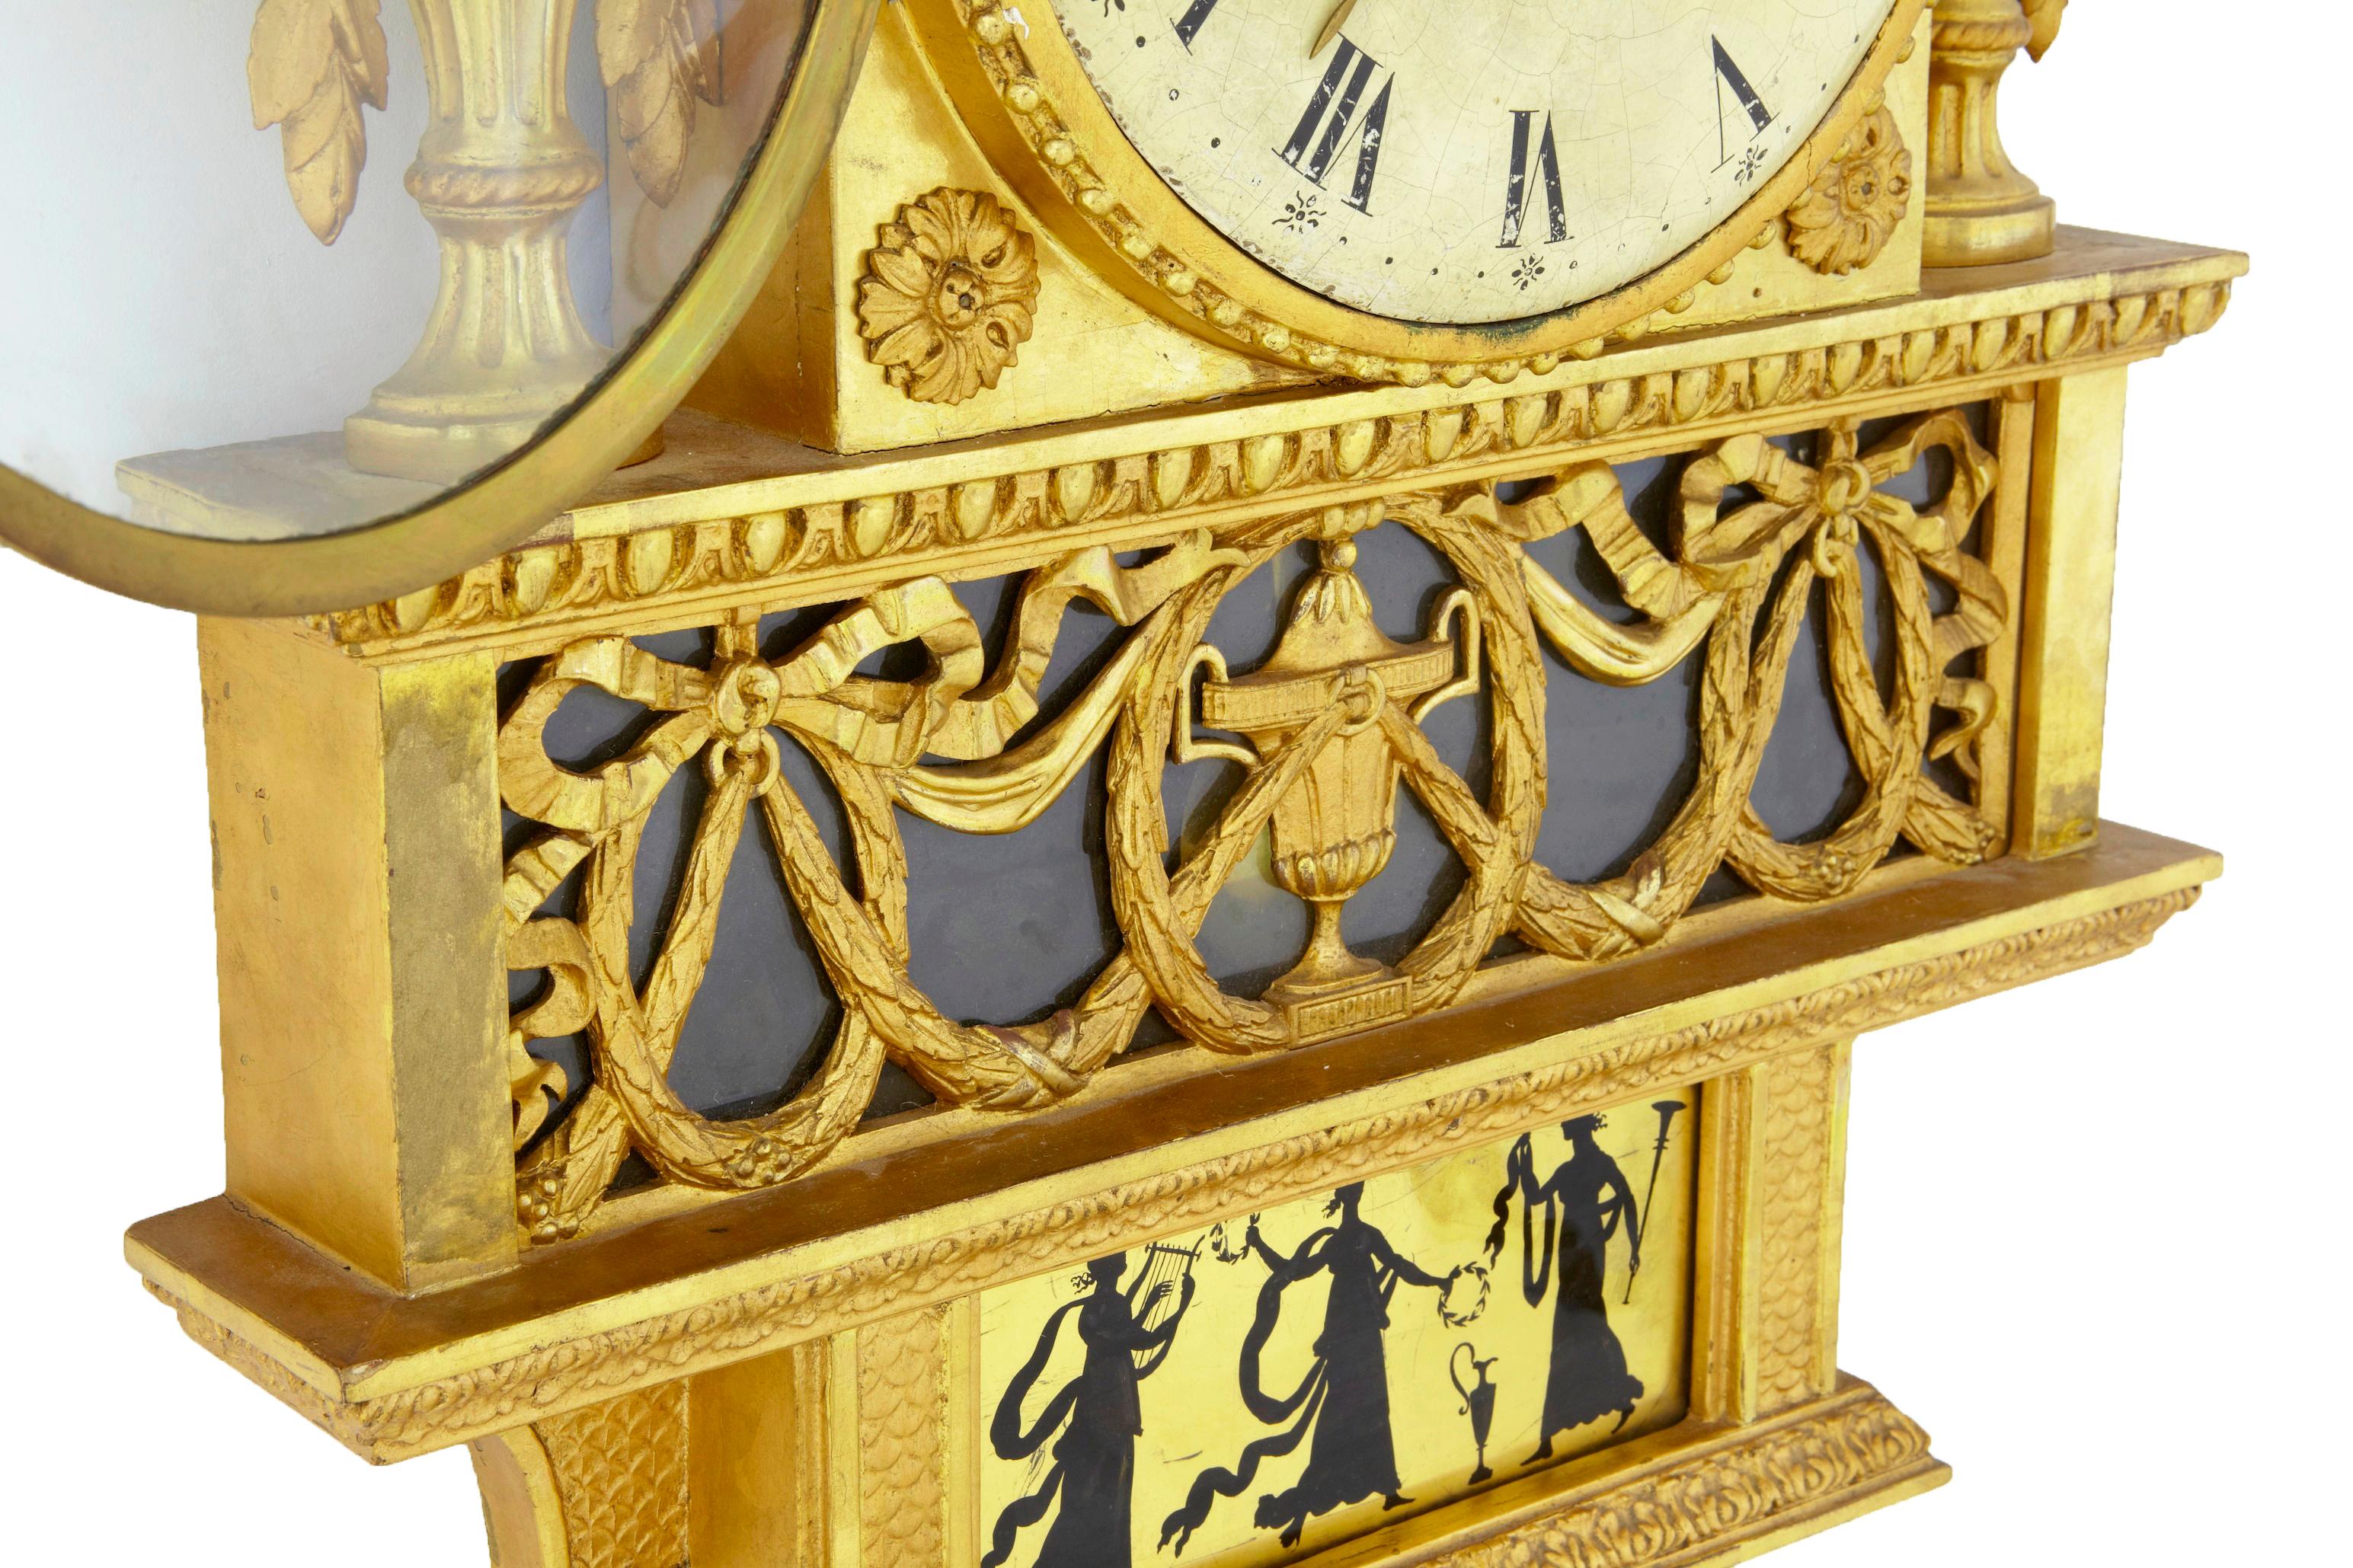 19th Century 19th century Swedish gilt and eglomise ornate wall clock For Sale